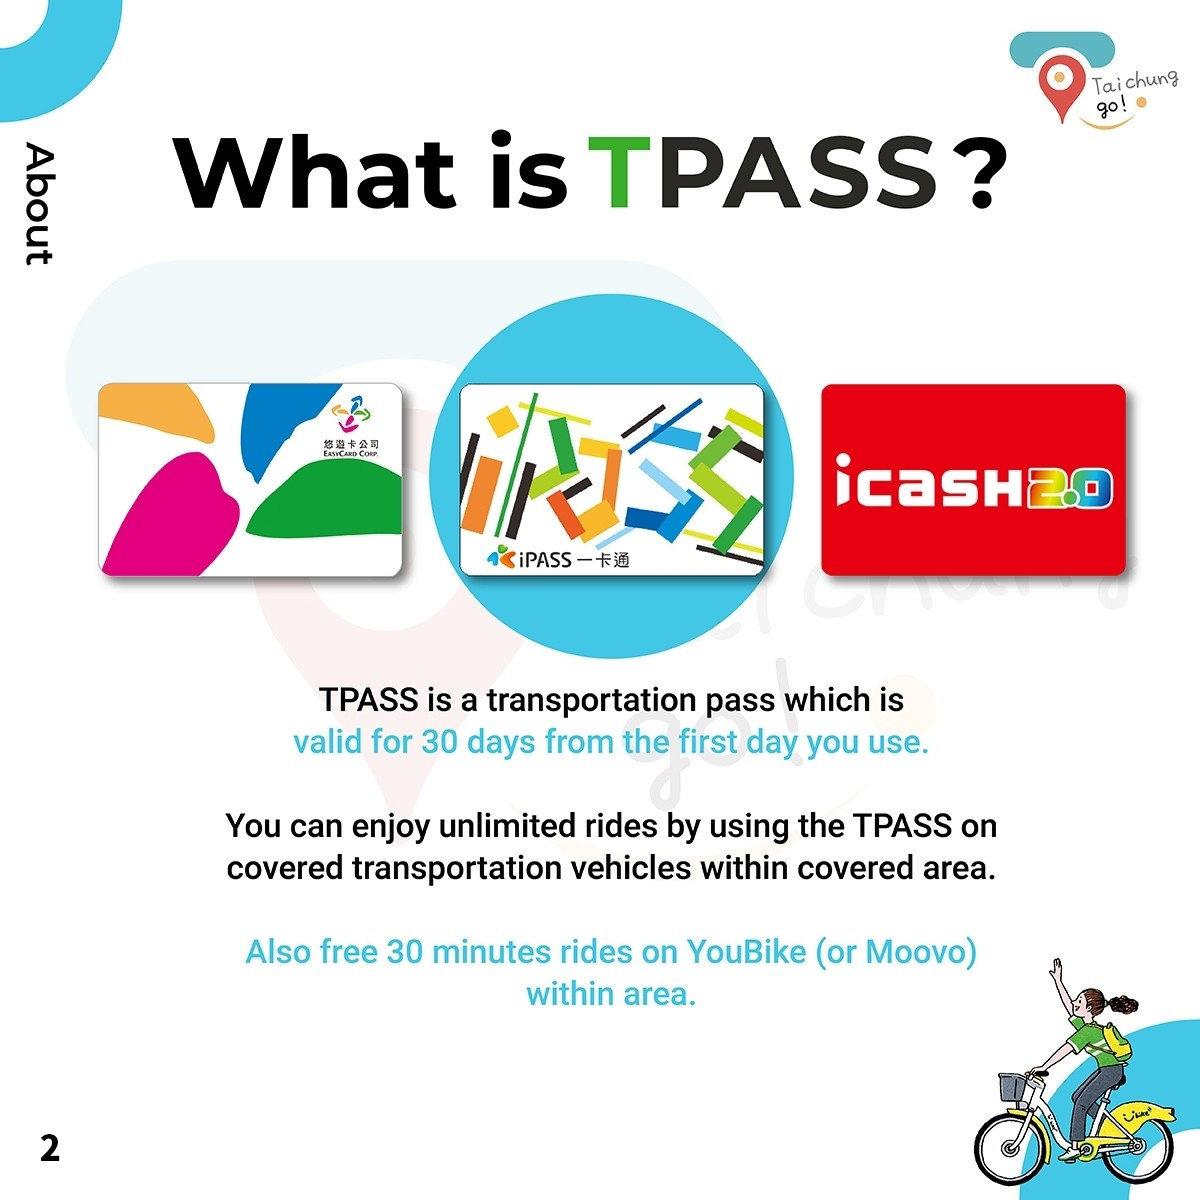 TPASS is a transportation pass which is valid for 30 days frin the first day you use. You can enjoy unlimited rides by using the TPASS on convered transportation vehicles within covered area. Also free 30 minutes rides on YouBike Or Moovo within area.